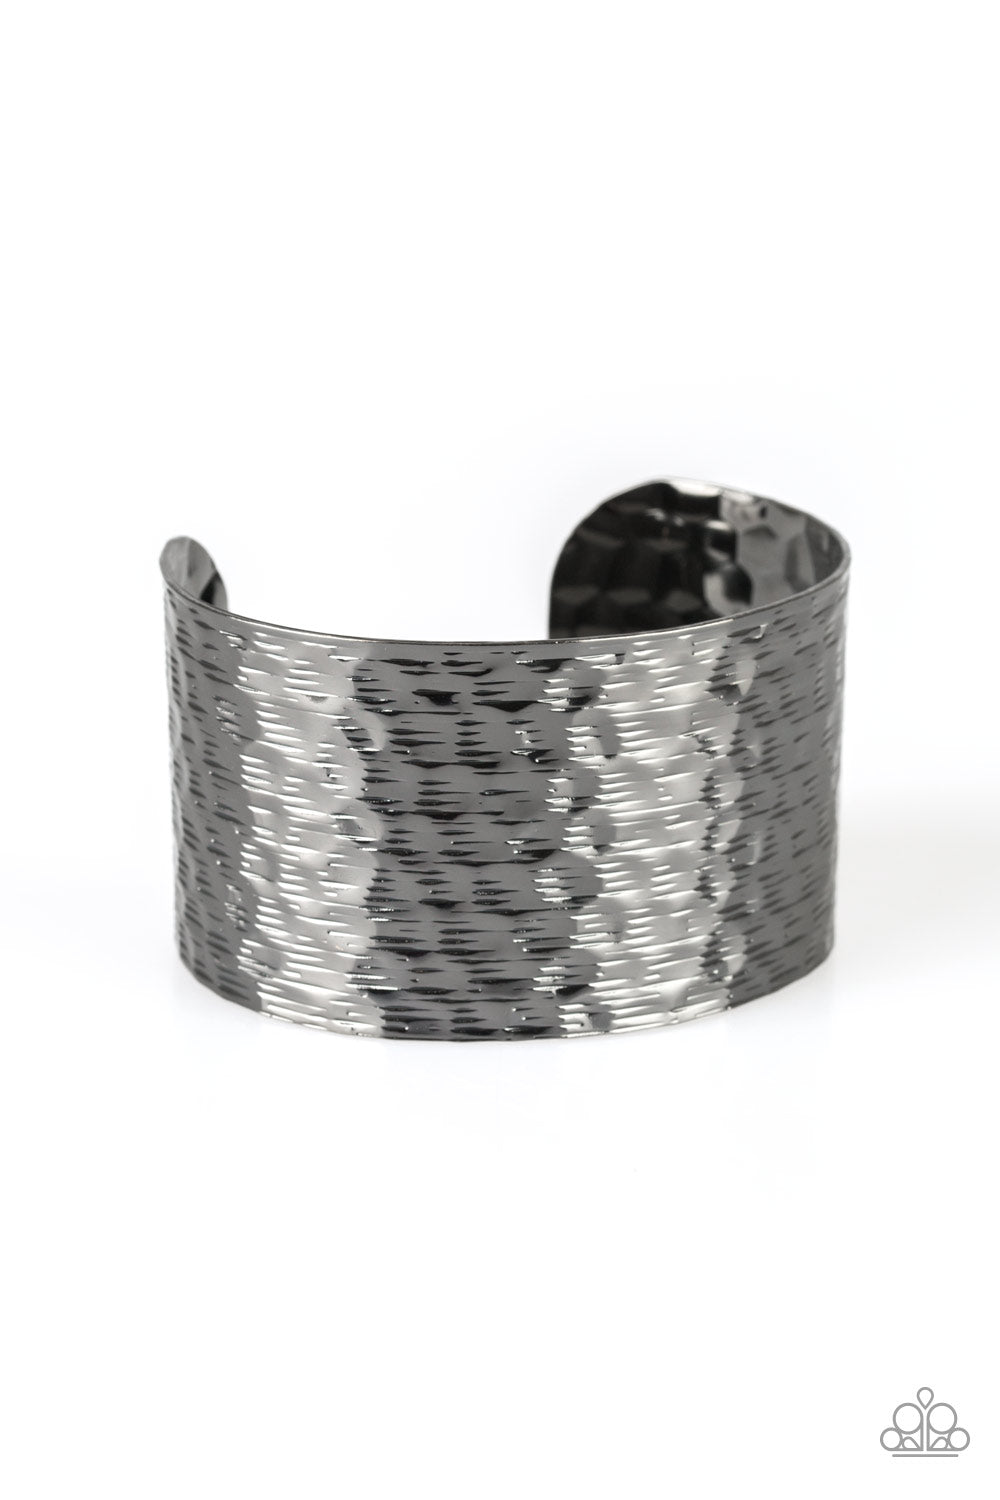 Shimmering Shimmer  Paparazzi Accessories Cuff Bracelet